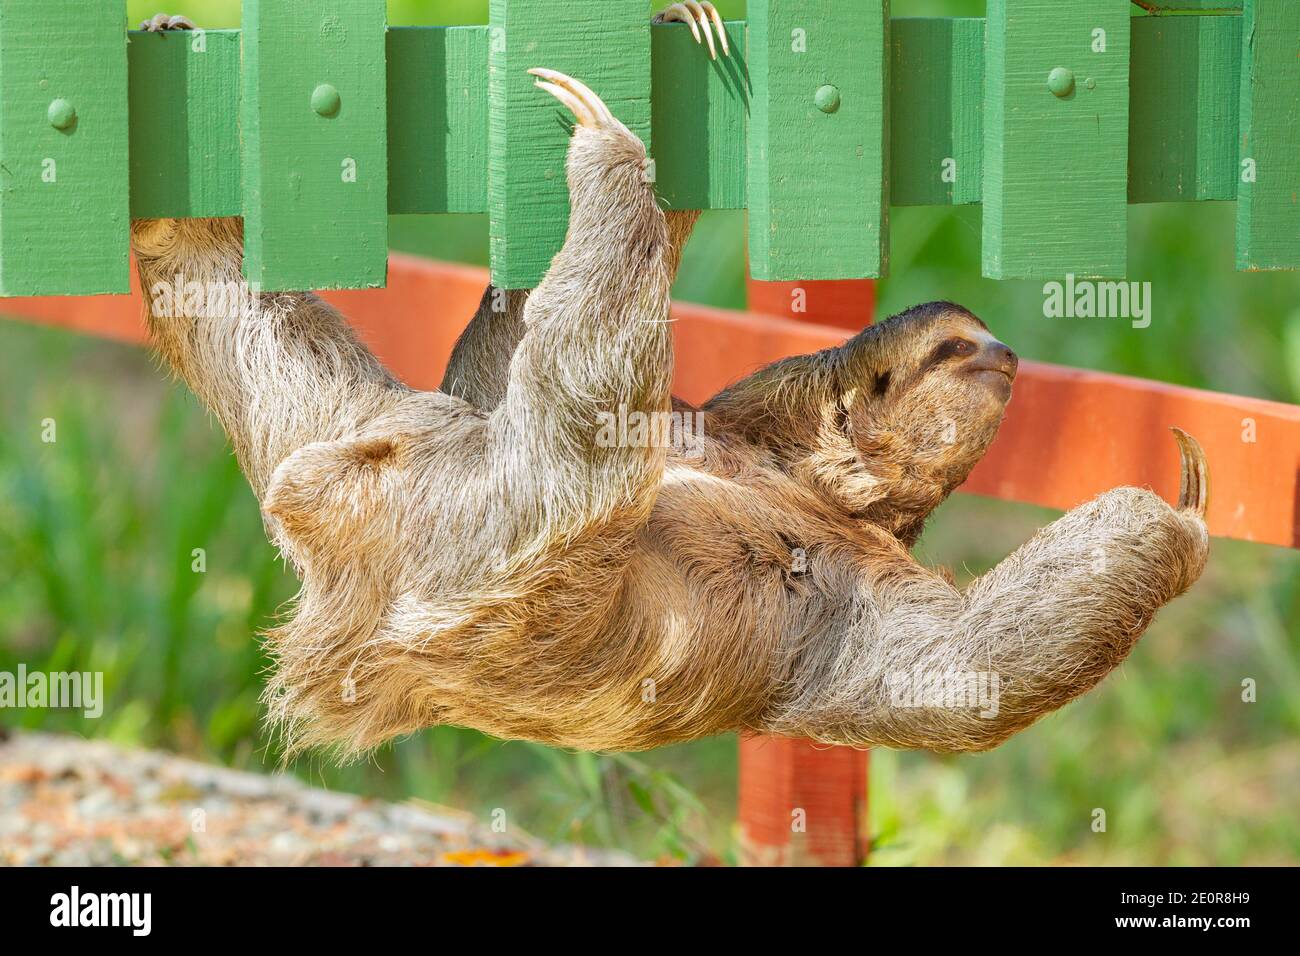 Three-Toed Sloth (Bradypus infuscatus) climbing along the bottom of a wooden fence Stock Photo